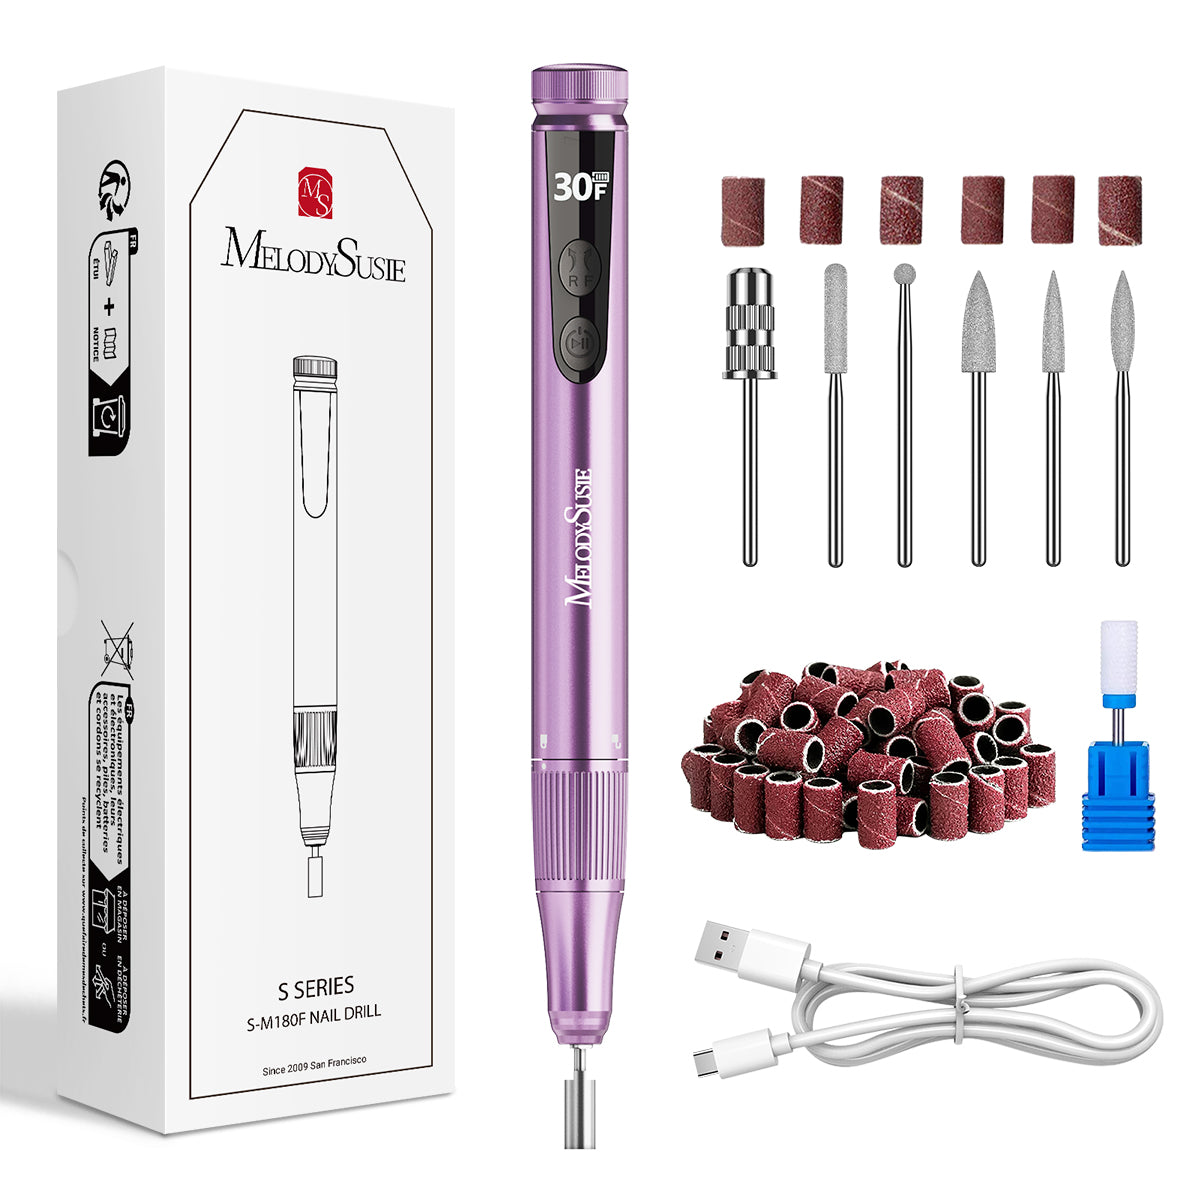 SM180F Portable & Stepless Speed Rechargeable Nail Drill 30000RPM - Rose Gold